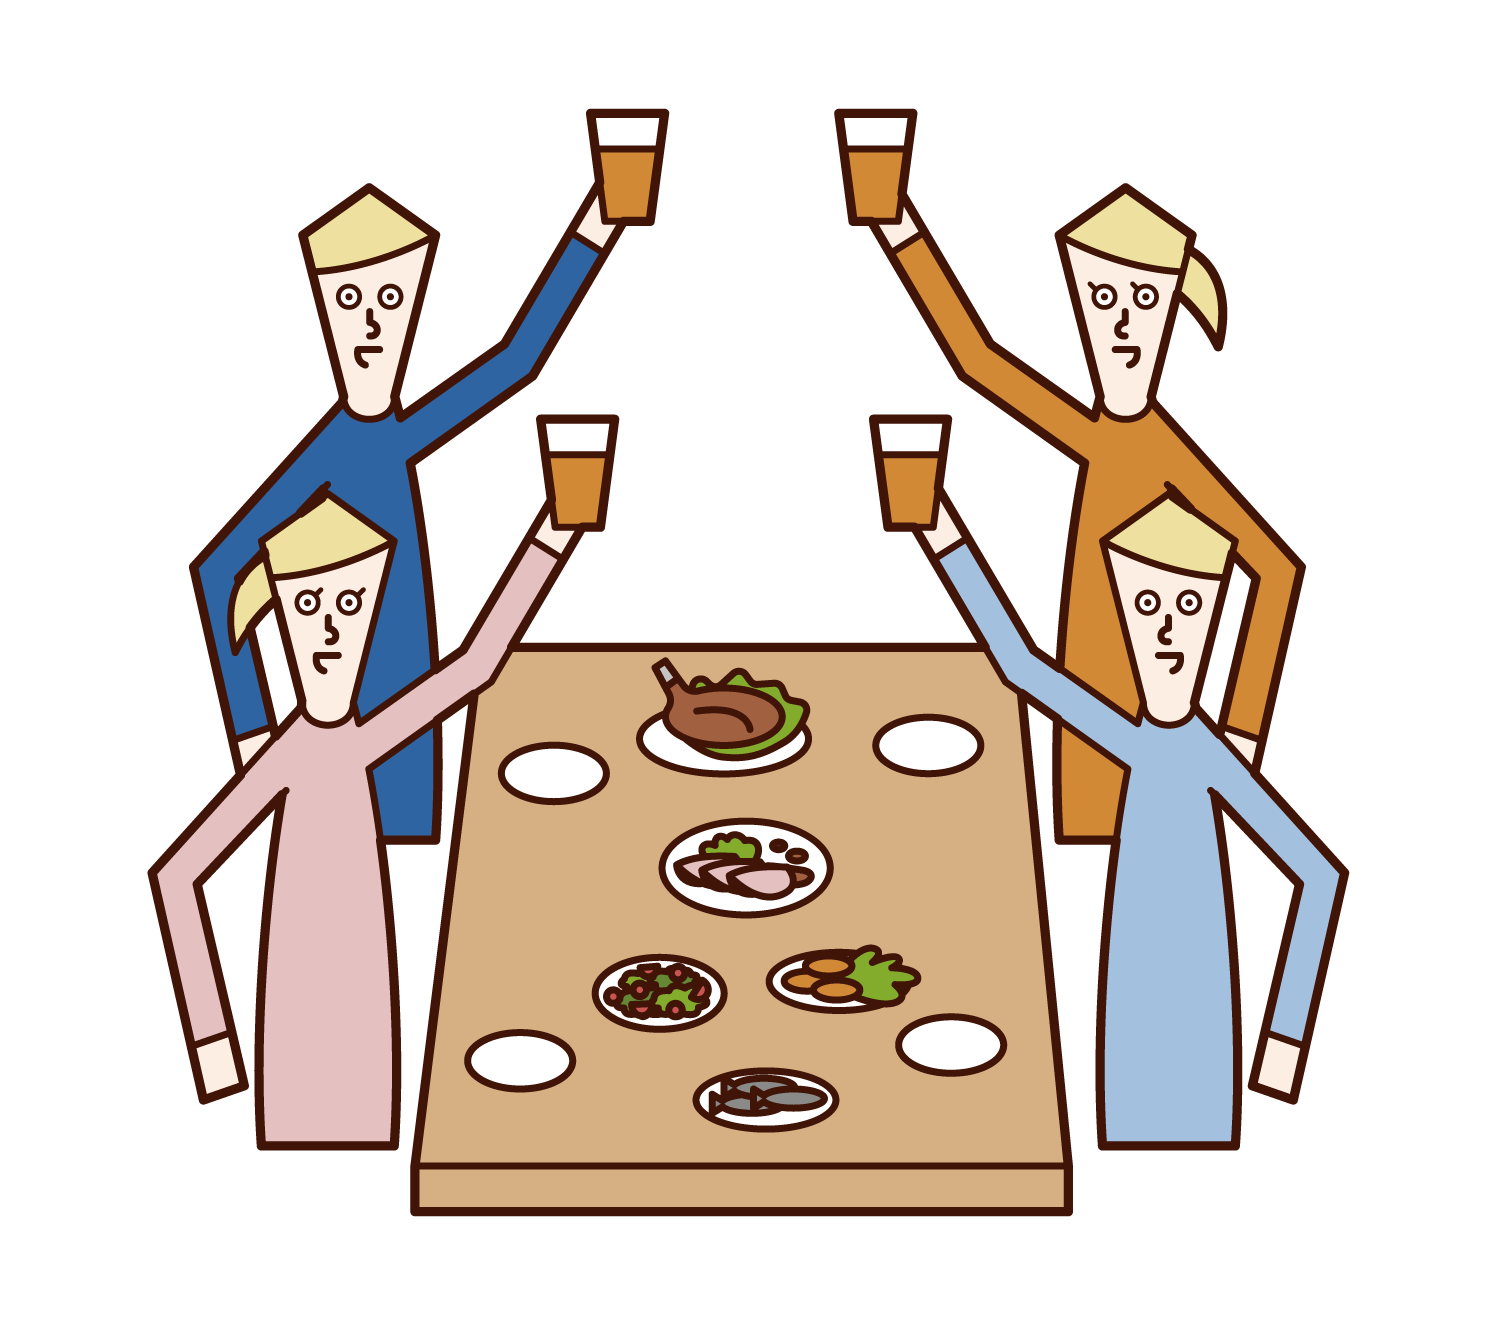 Illustrations of people (men and women) toasting at a standing party